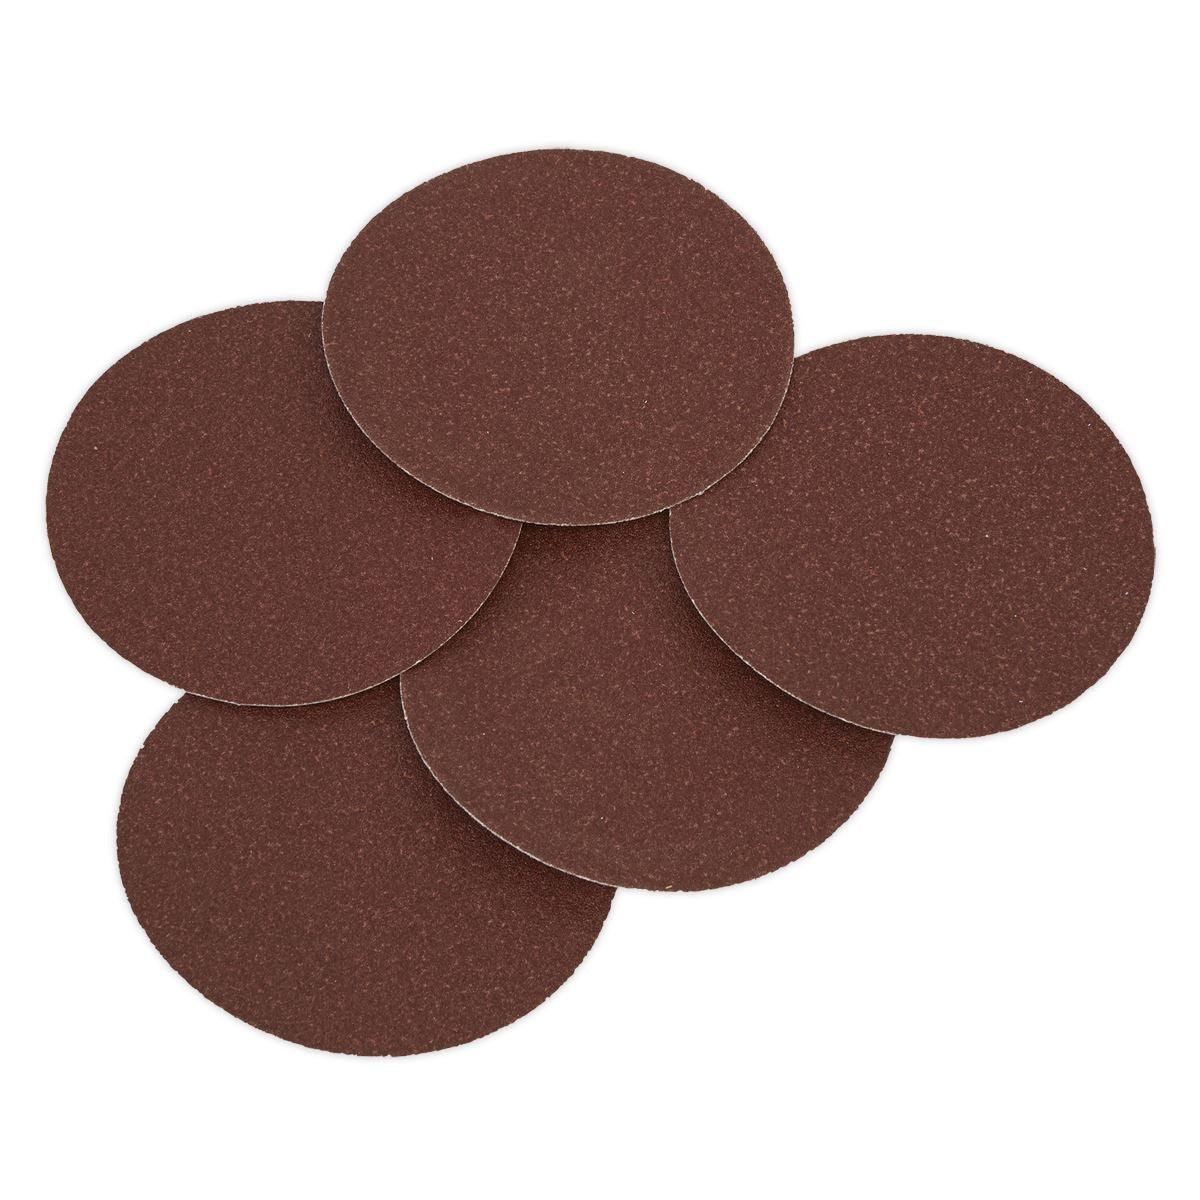 Sealey Sanding Disc Ø125mm 80Grit Adhesive Backed Pack of 5